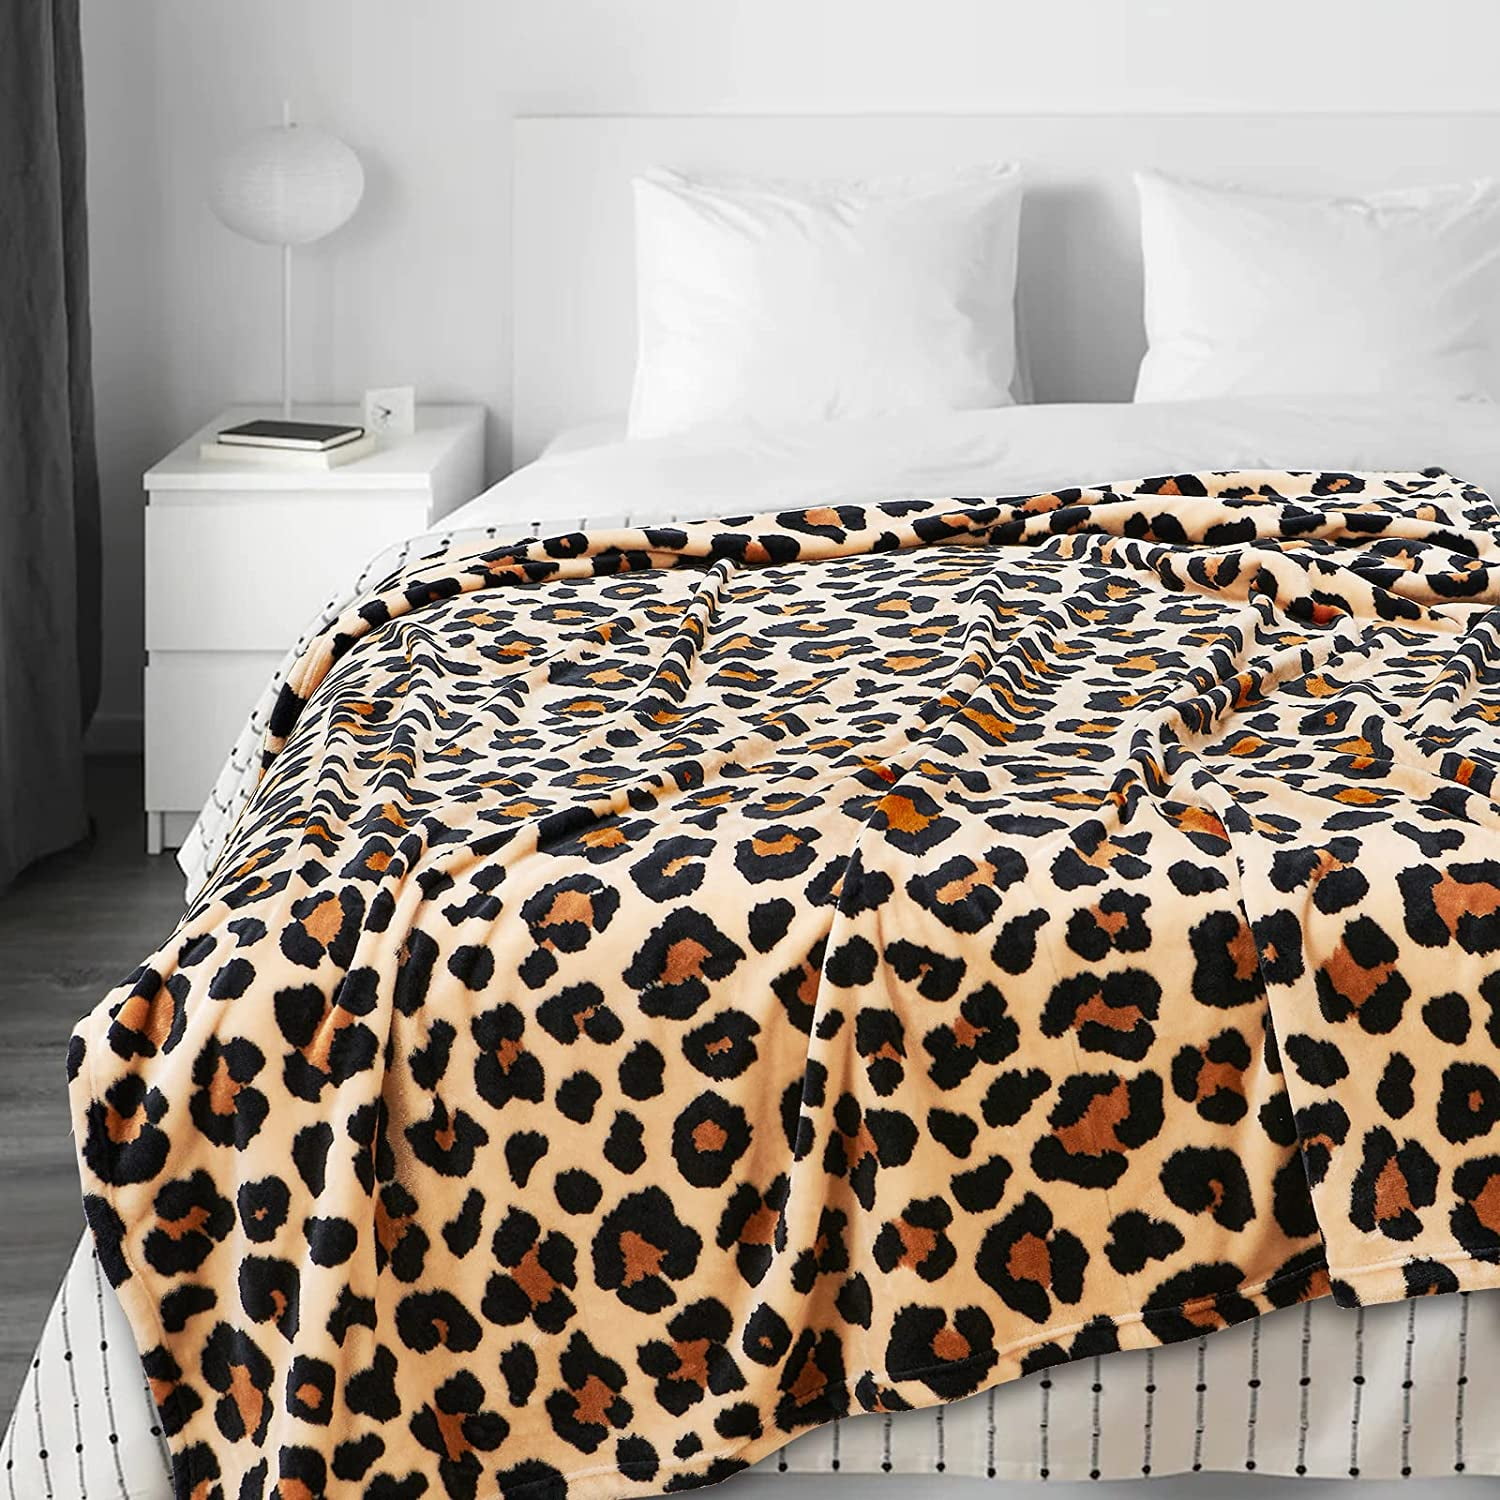 Cheetah Print Blanket, Super Soft Flannel Throw Blanket, Lightweight Cozy Cheetah  Blanket for Couch Bed, Breathable and Portable Travel Blanket for All  Seasons(Brown Leopard, 50\u201dx60\u201d) 